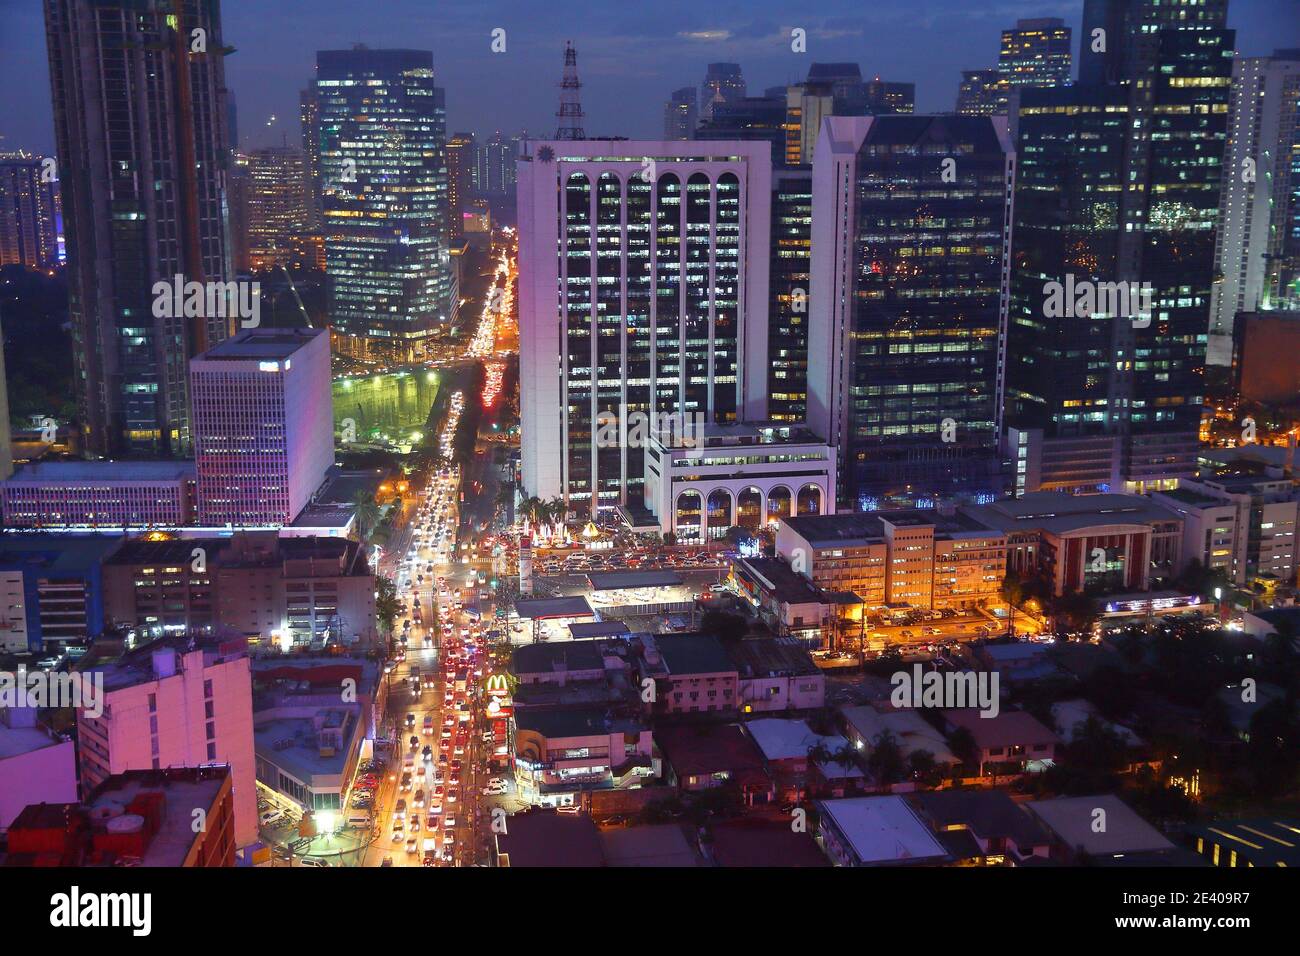 MANILA, PHILIPPINES - DECEMBER 7, 2017: Typical traffic congestion in Poblacion Makati, Philippines. Metro Manila is one of the biggest urban areas in Stock Photo